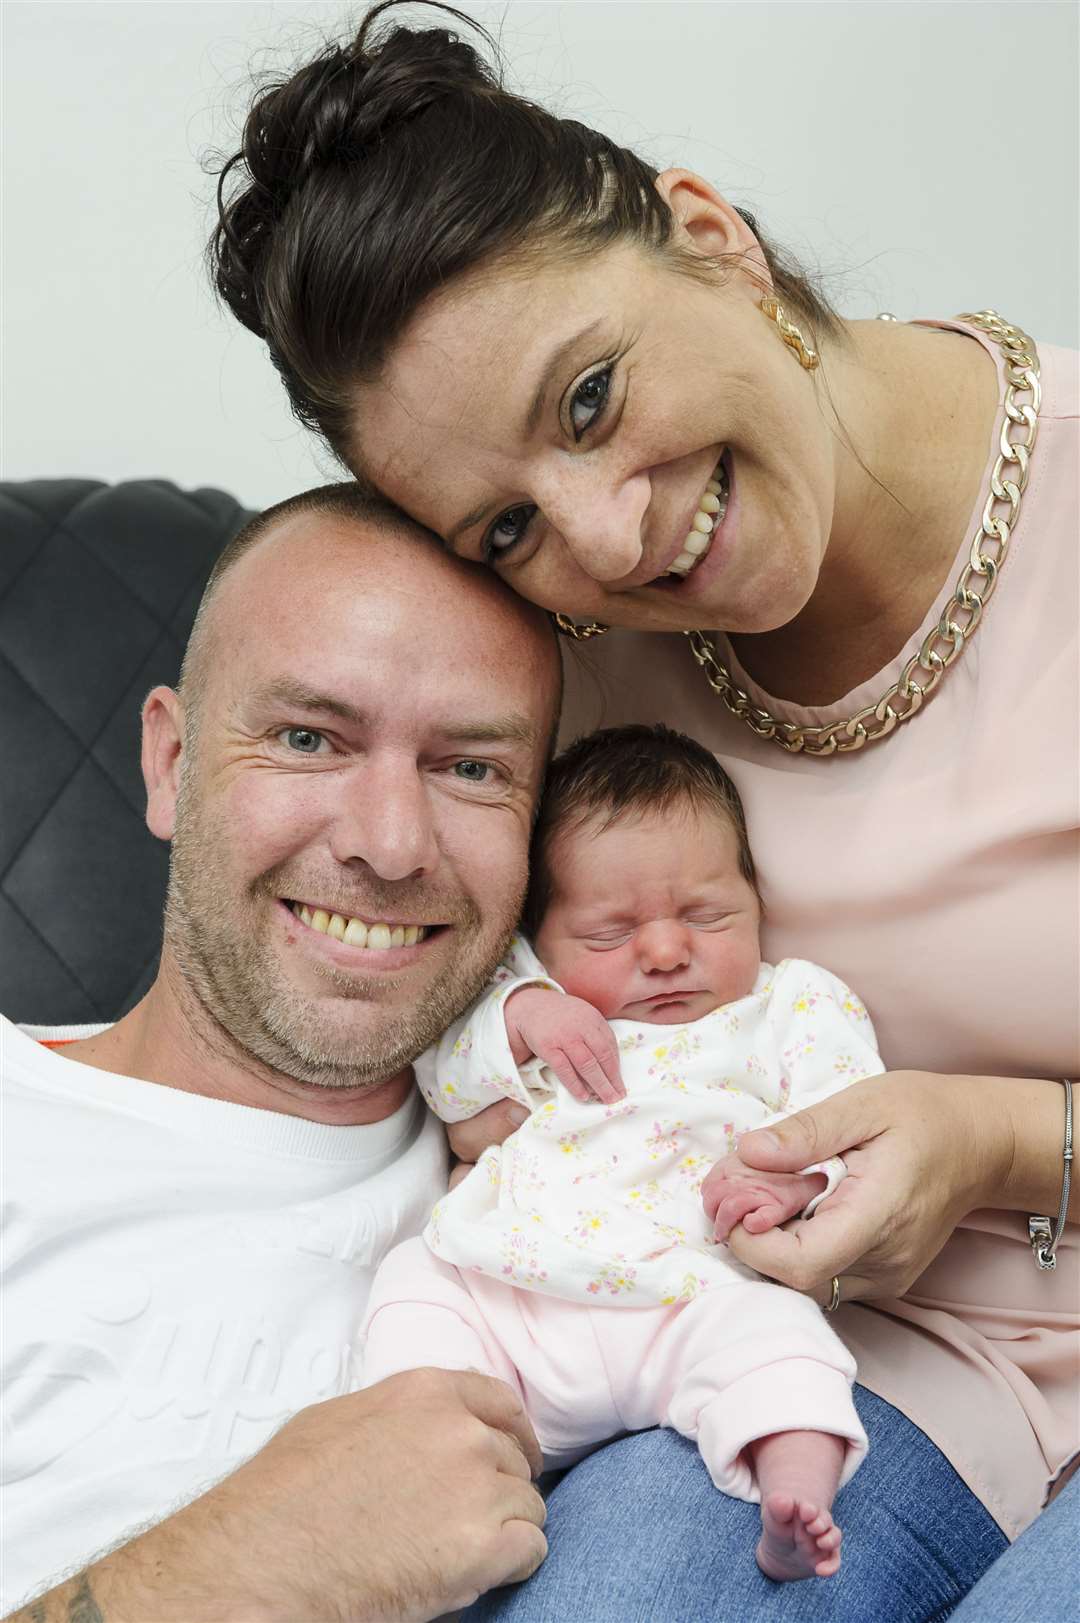 Mum Cassie Brookman had initially thought she was suffering from Braxton Hicks contractions